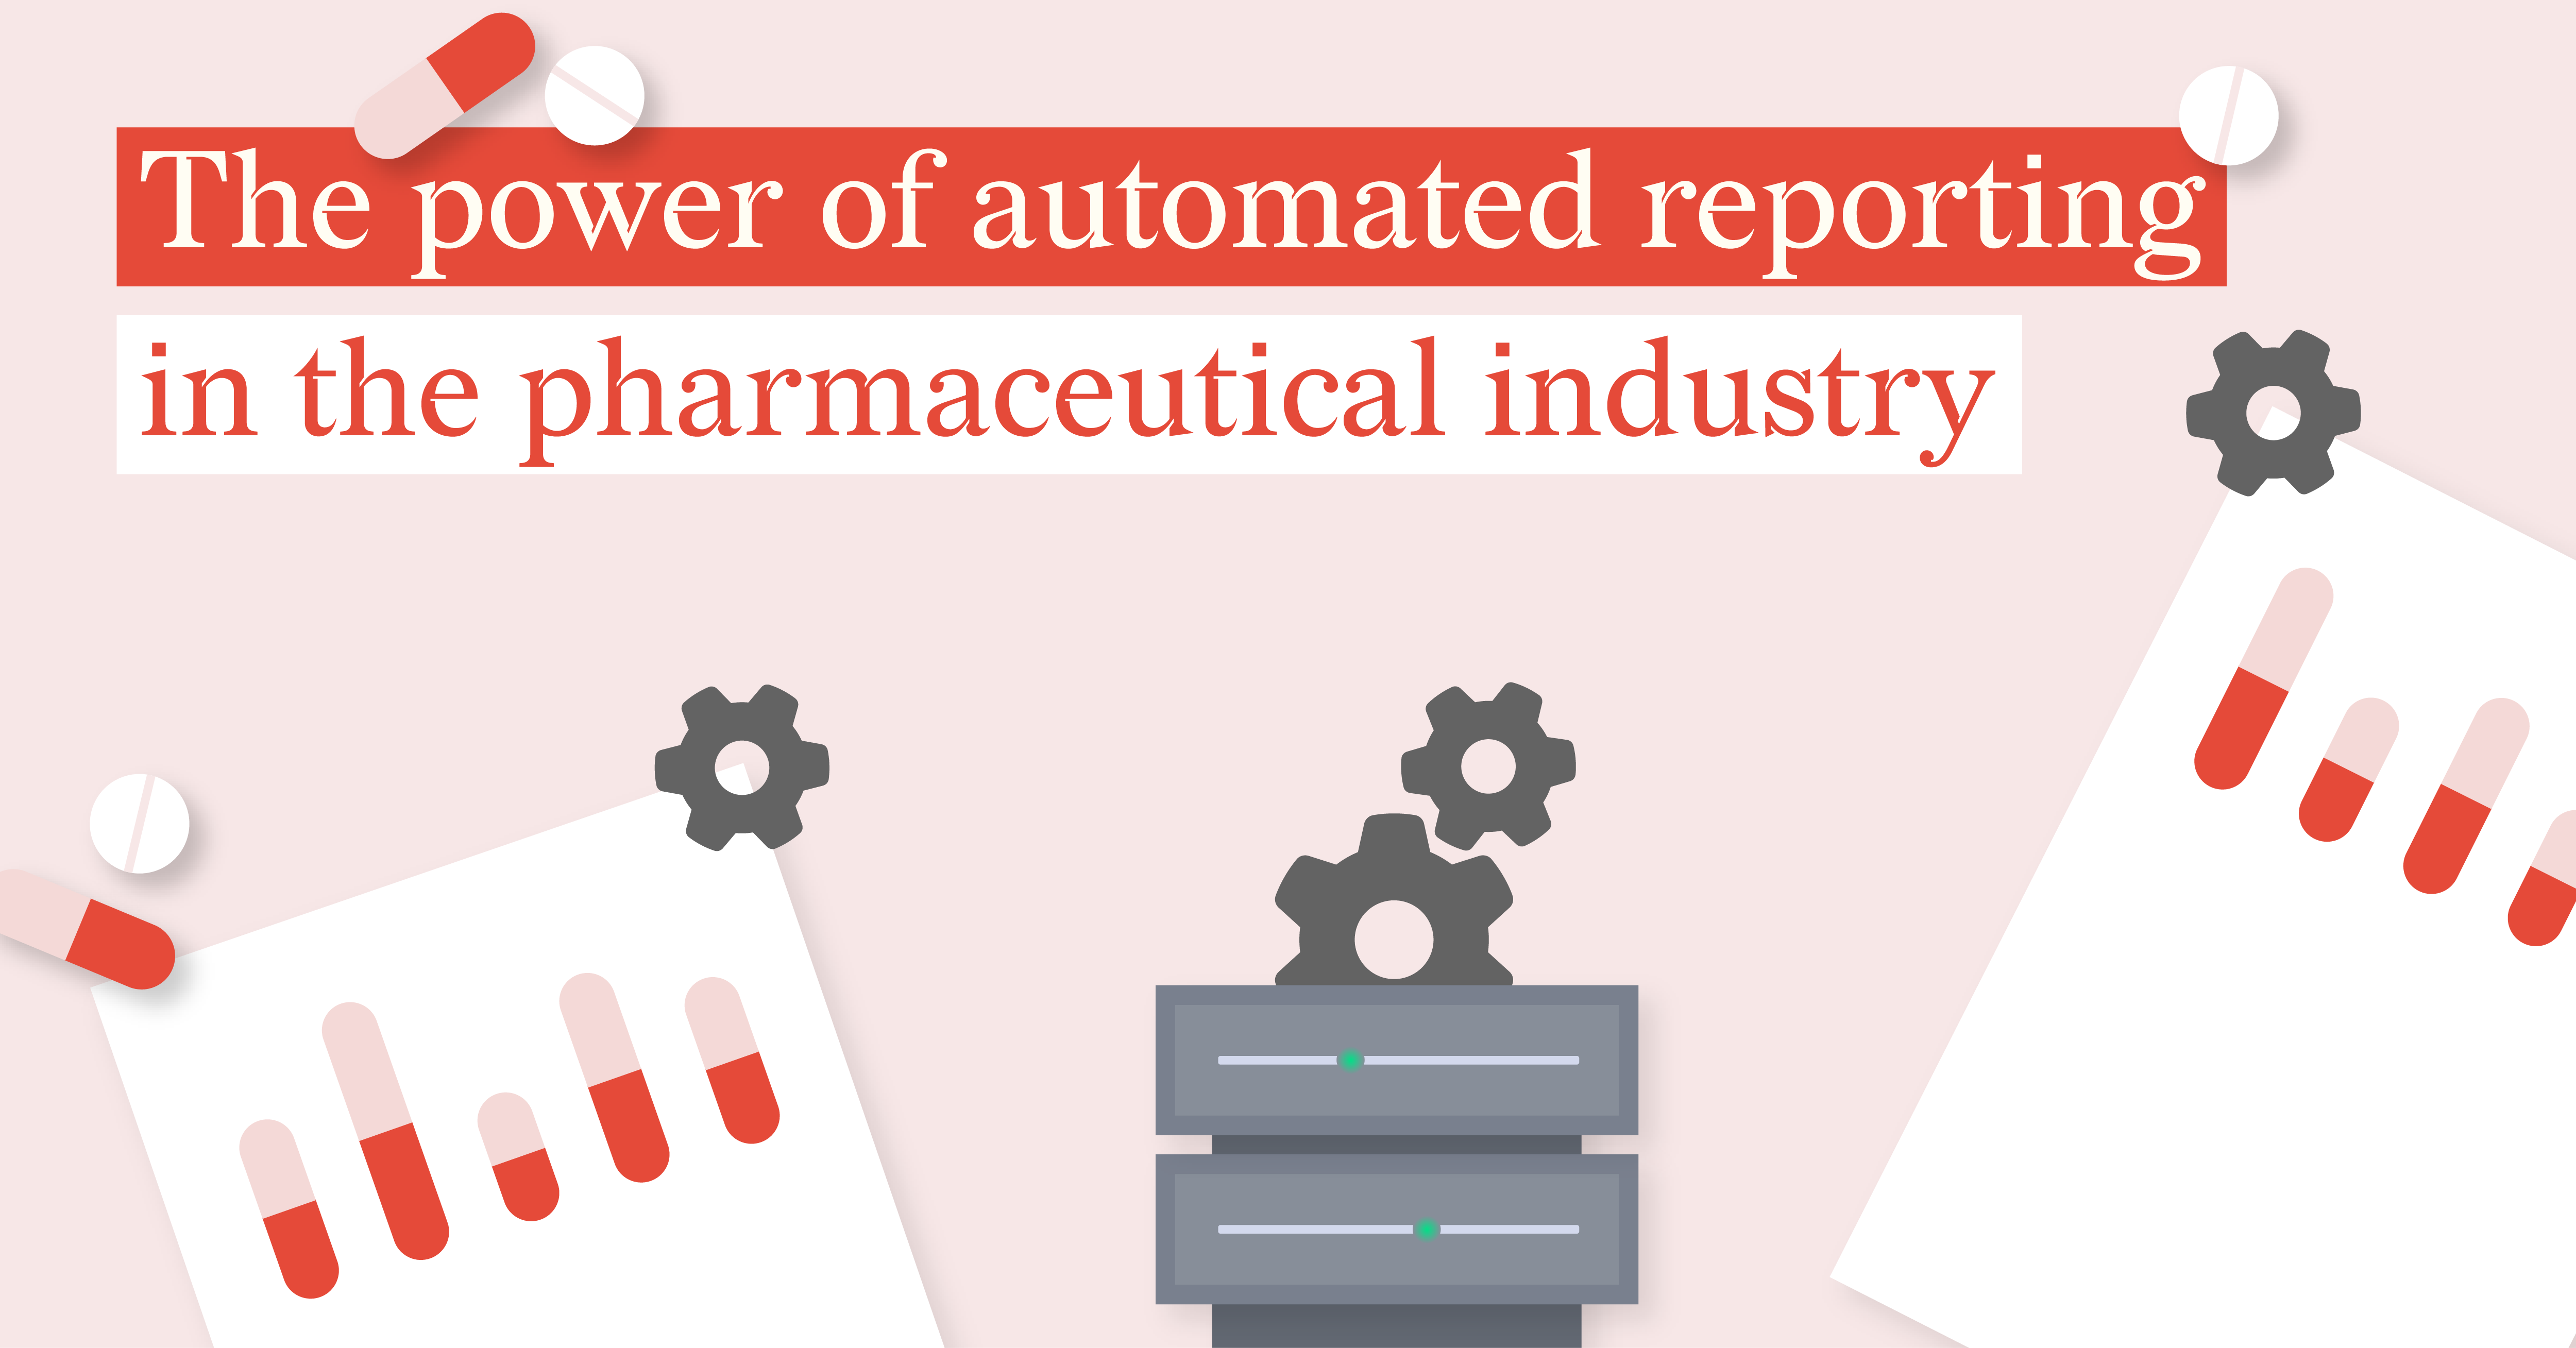 datylon-blog-Leveraging-the-Power-of-Automated-Reporting-in-the-Pharmaceutical-Industry-featured-image